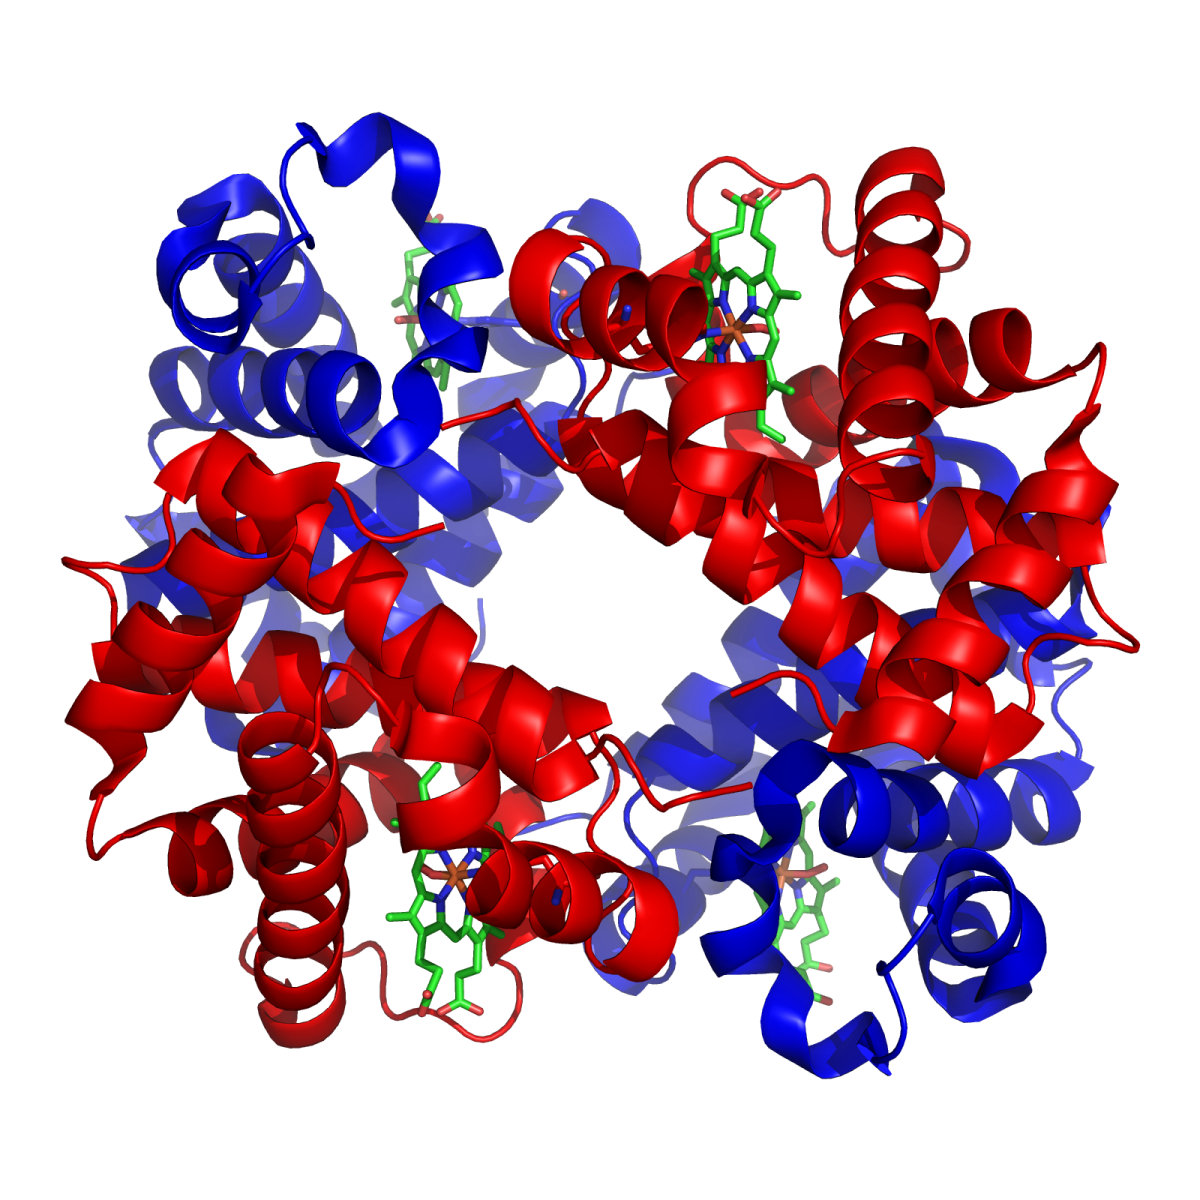 The quintessential example of protein structure: Haemoglobin. Clearly seen are the quaternary, tertiary and secondary structures